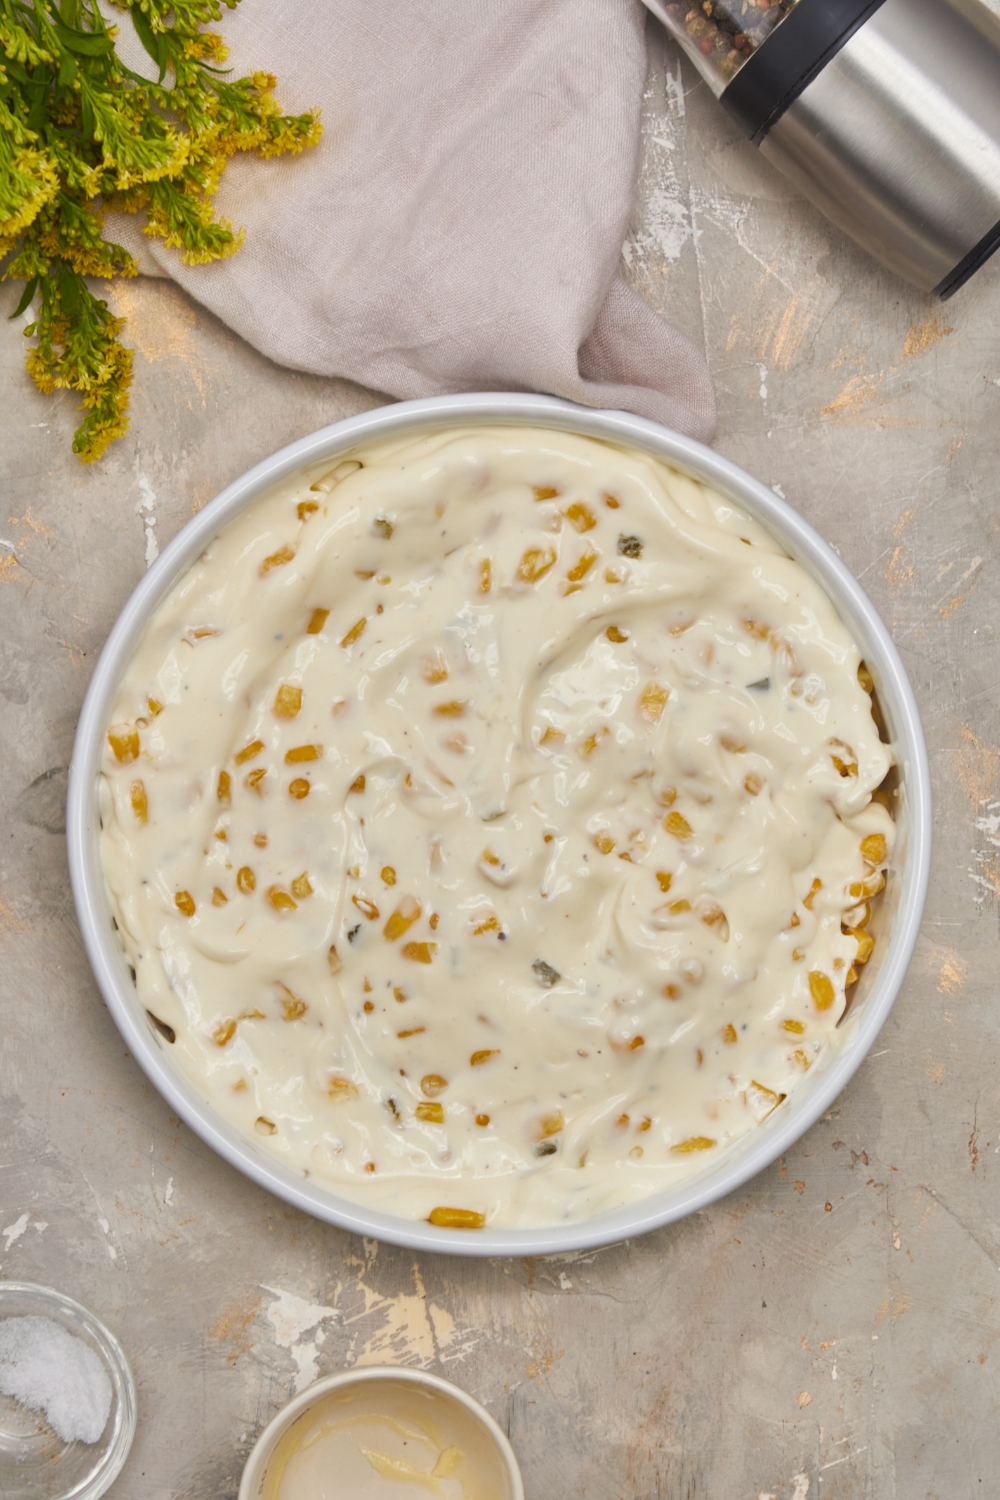 A round white baking dish filled with corn and a cream sauce mixture spread over top of the corn.